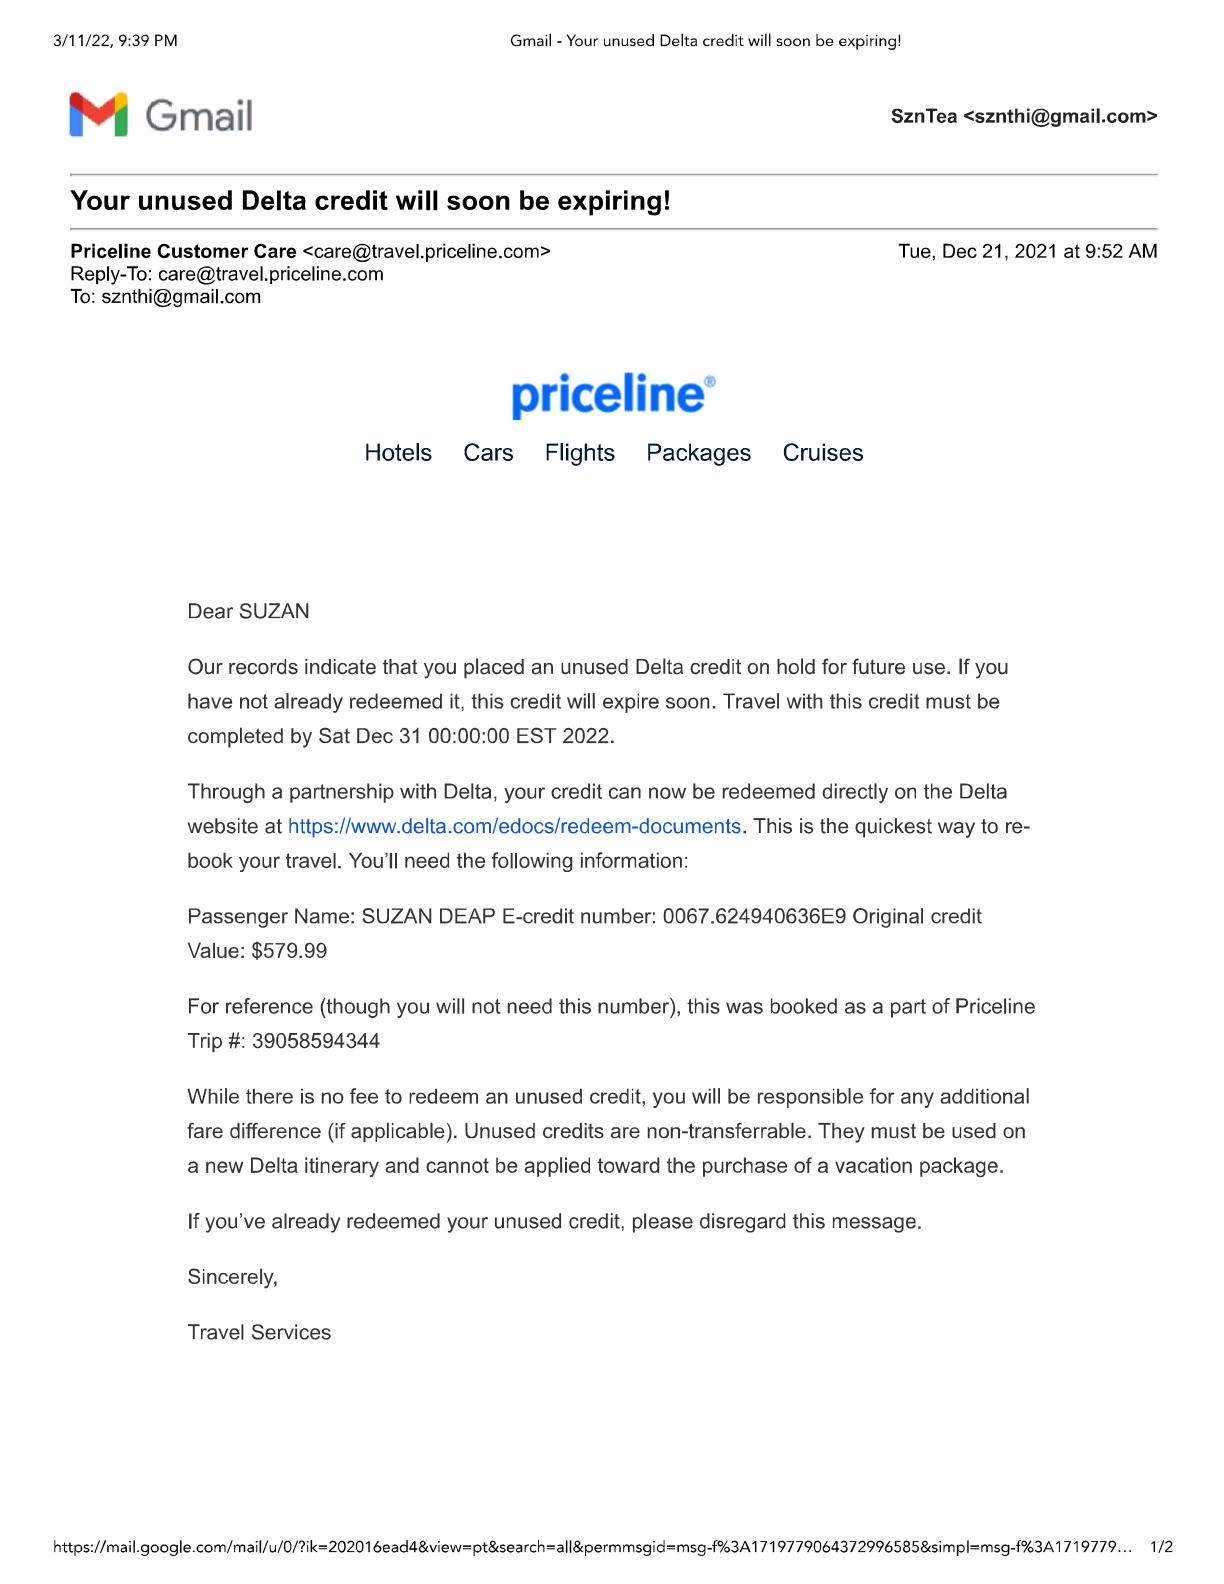 Priceline complaint cancelling my flight and wrong information